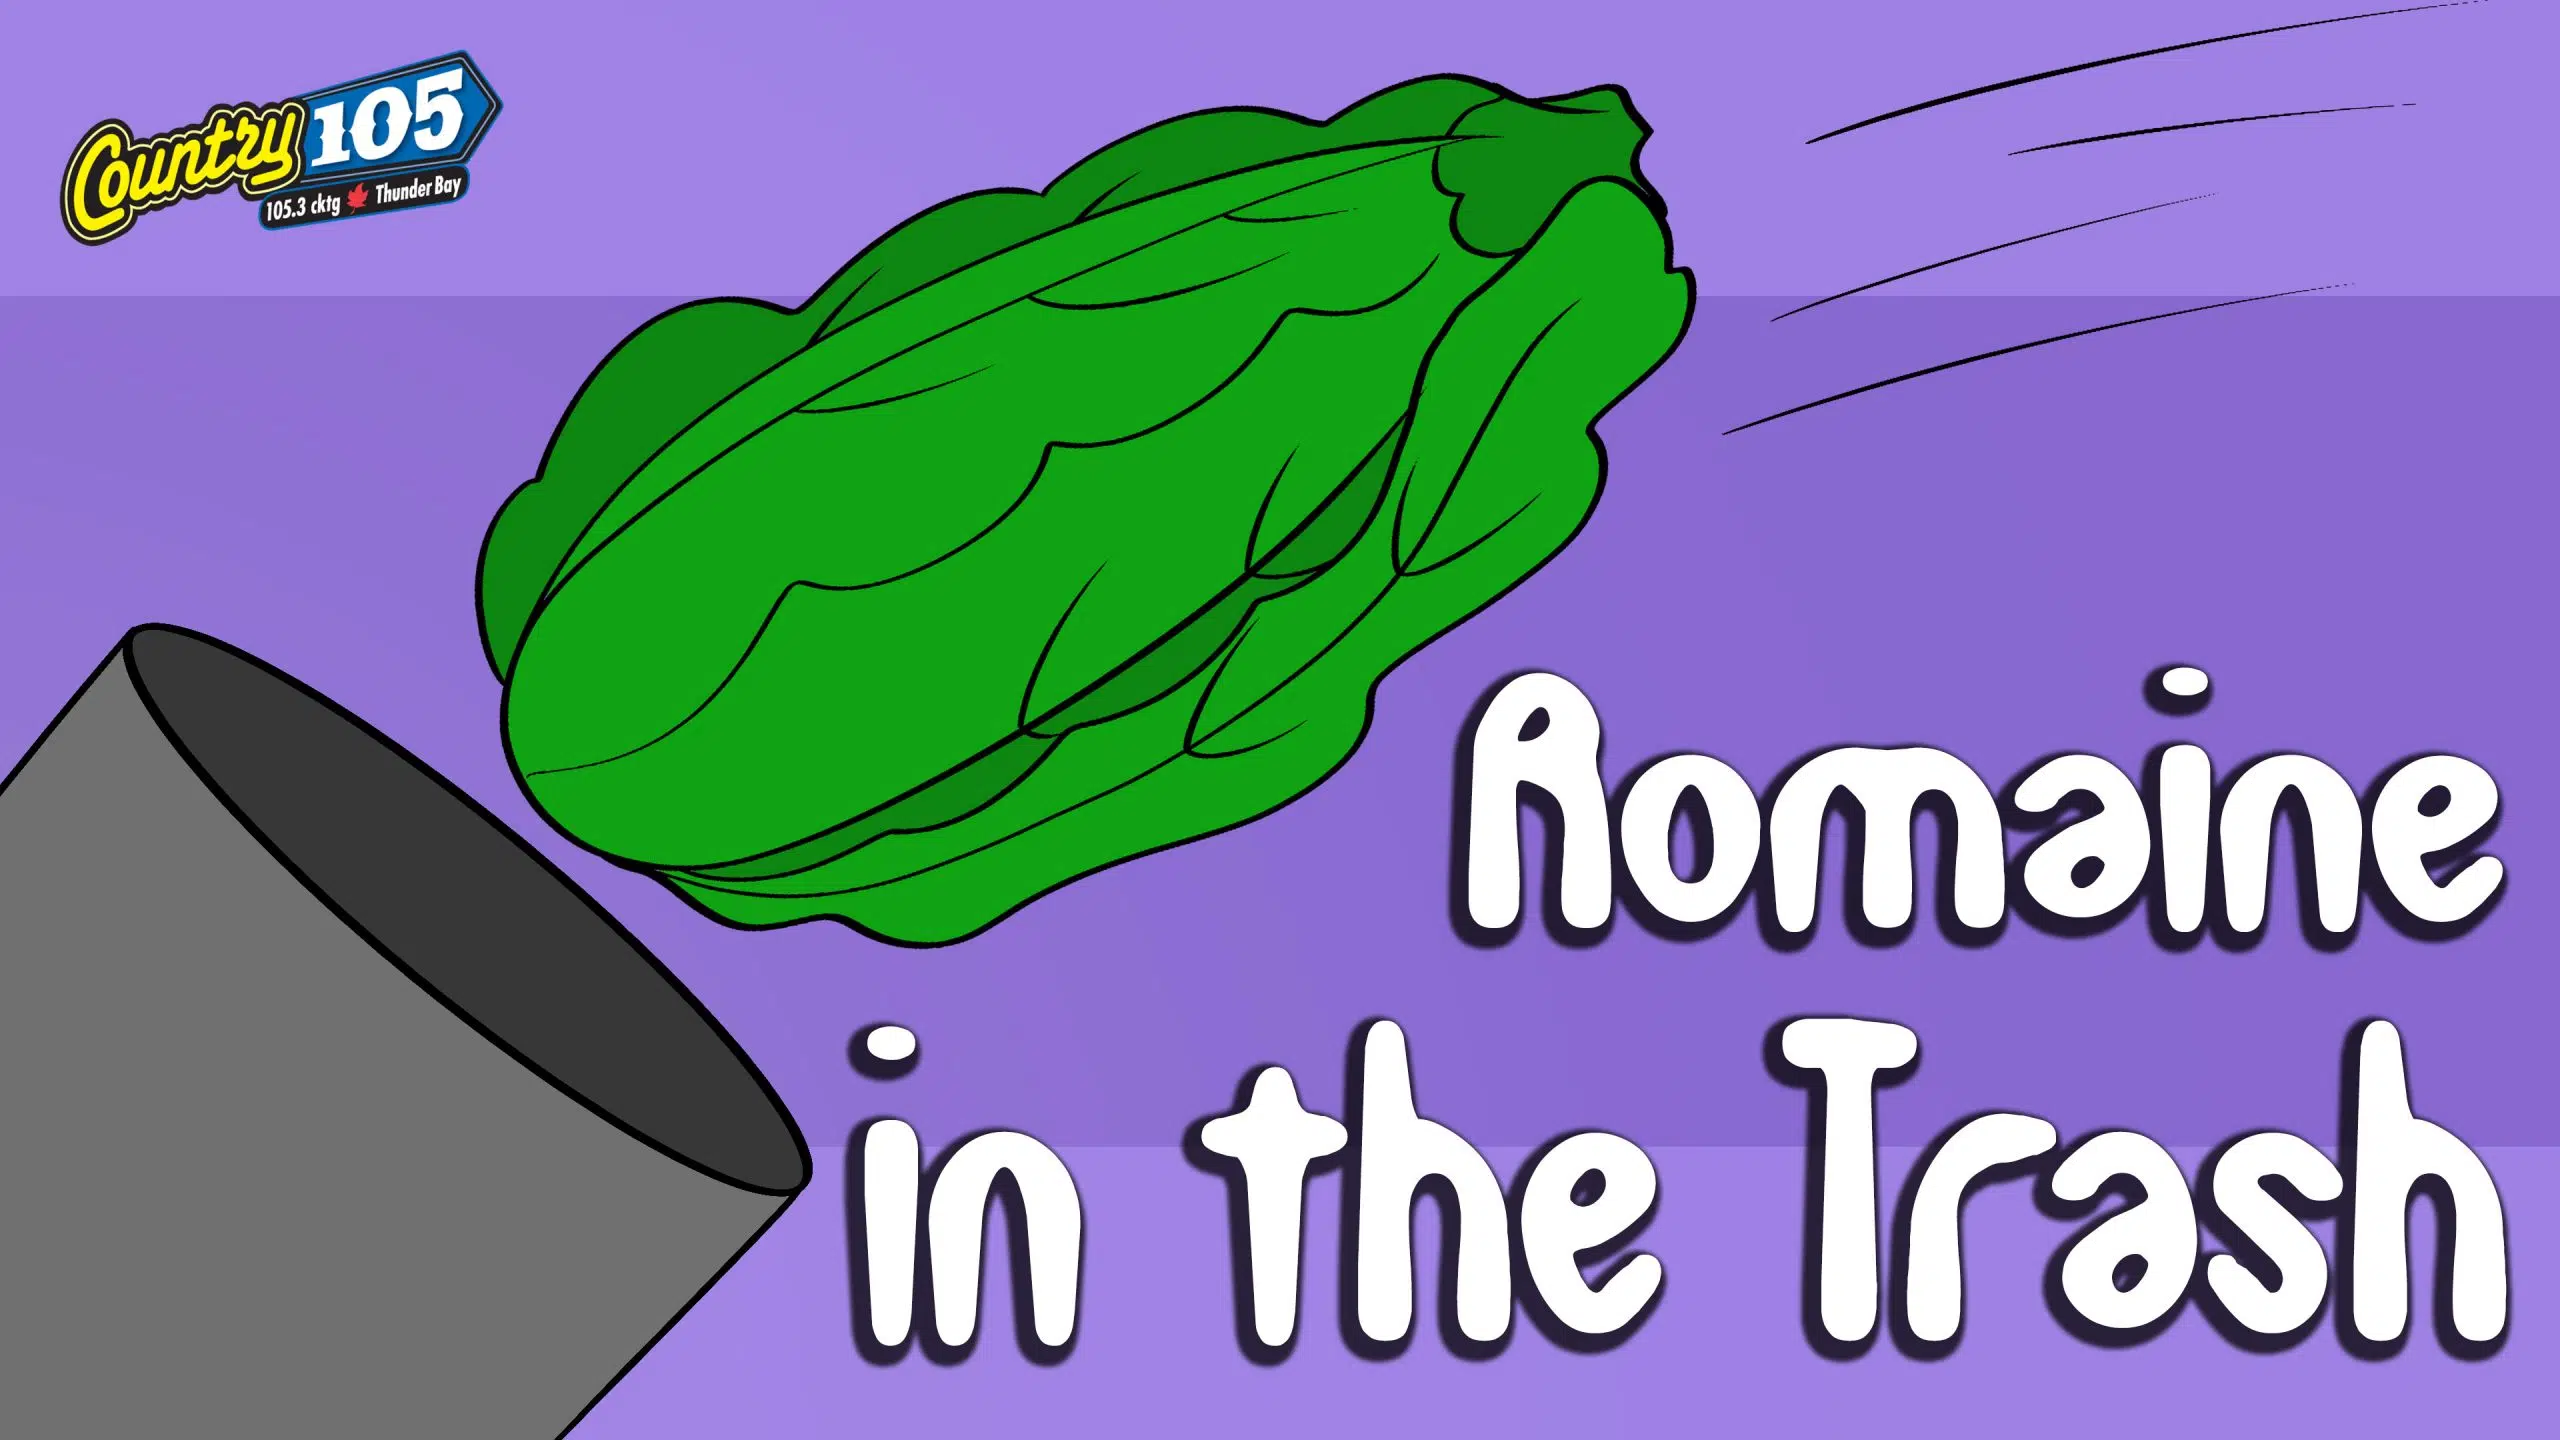 Video: Romaine in the Trash